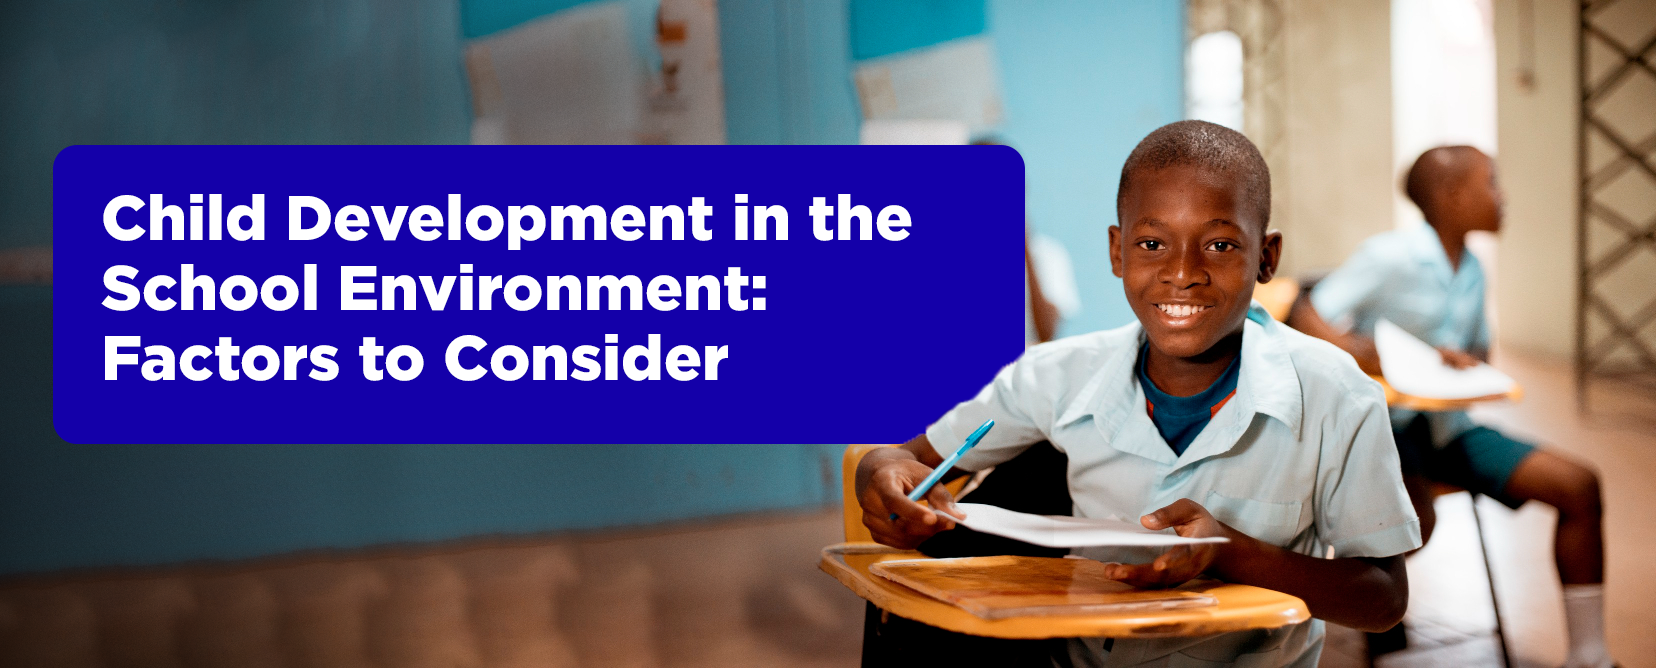 Child development in the school environment: Factors to Consider